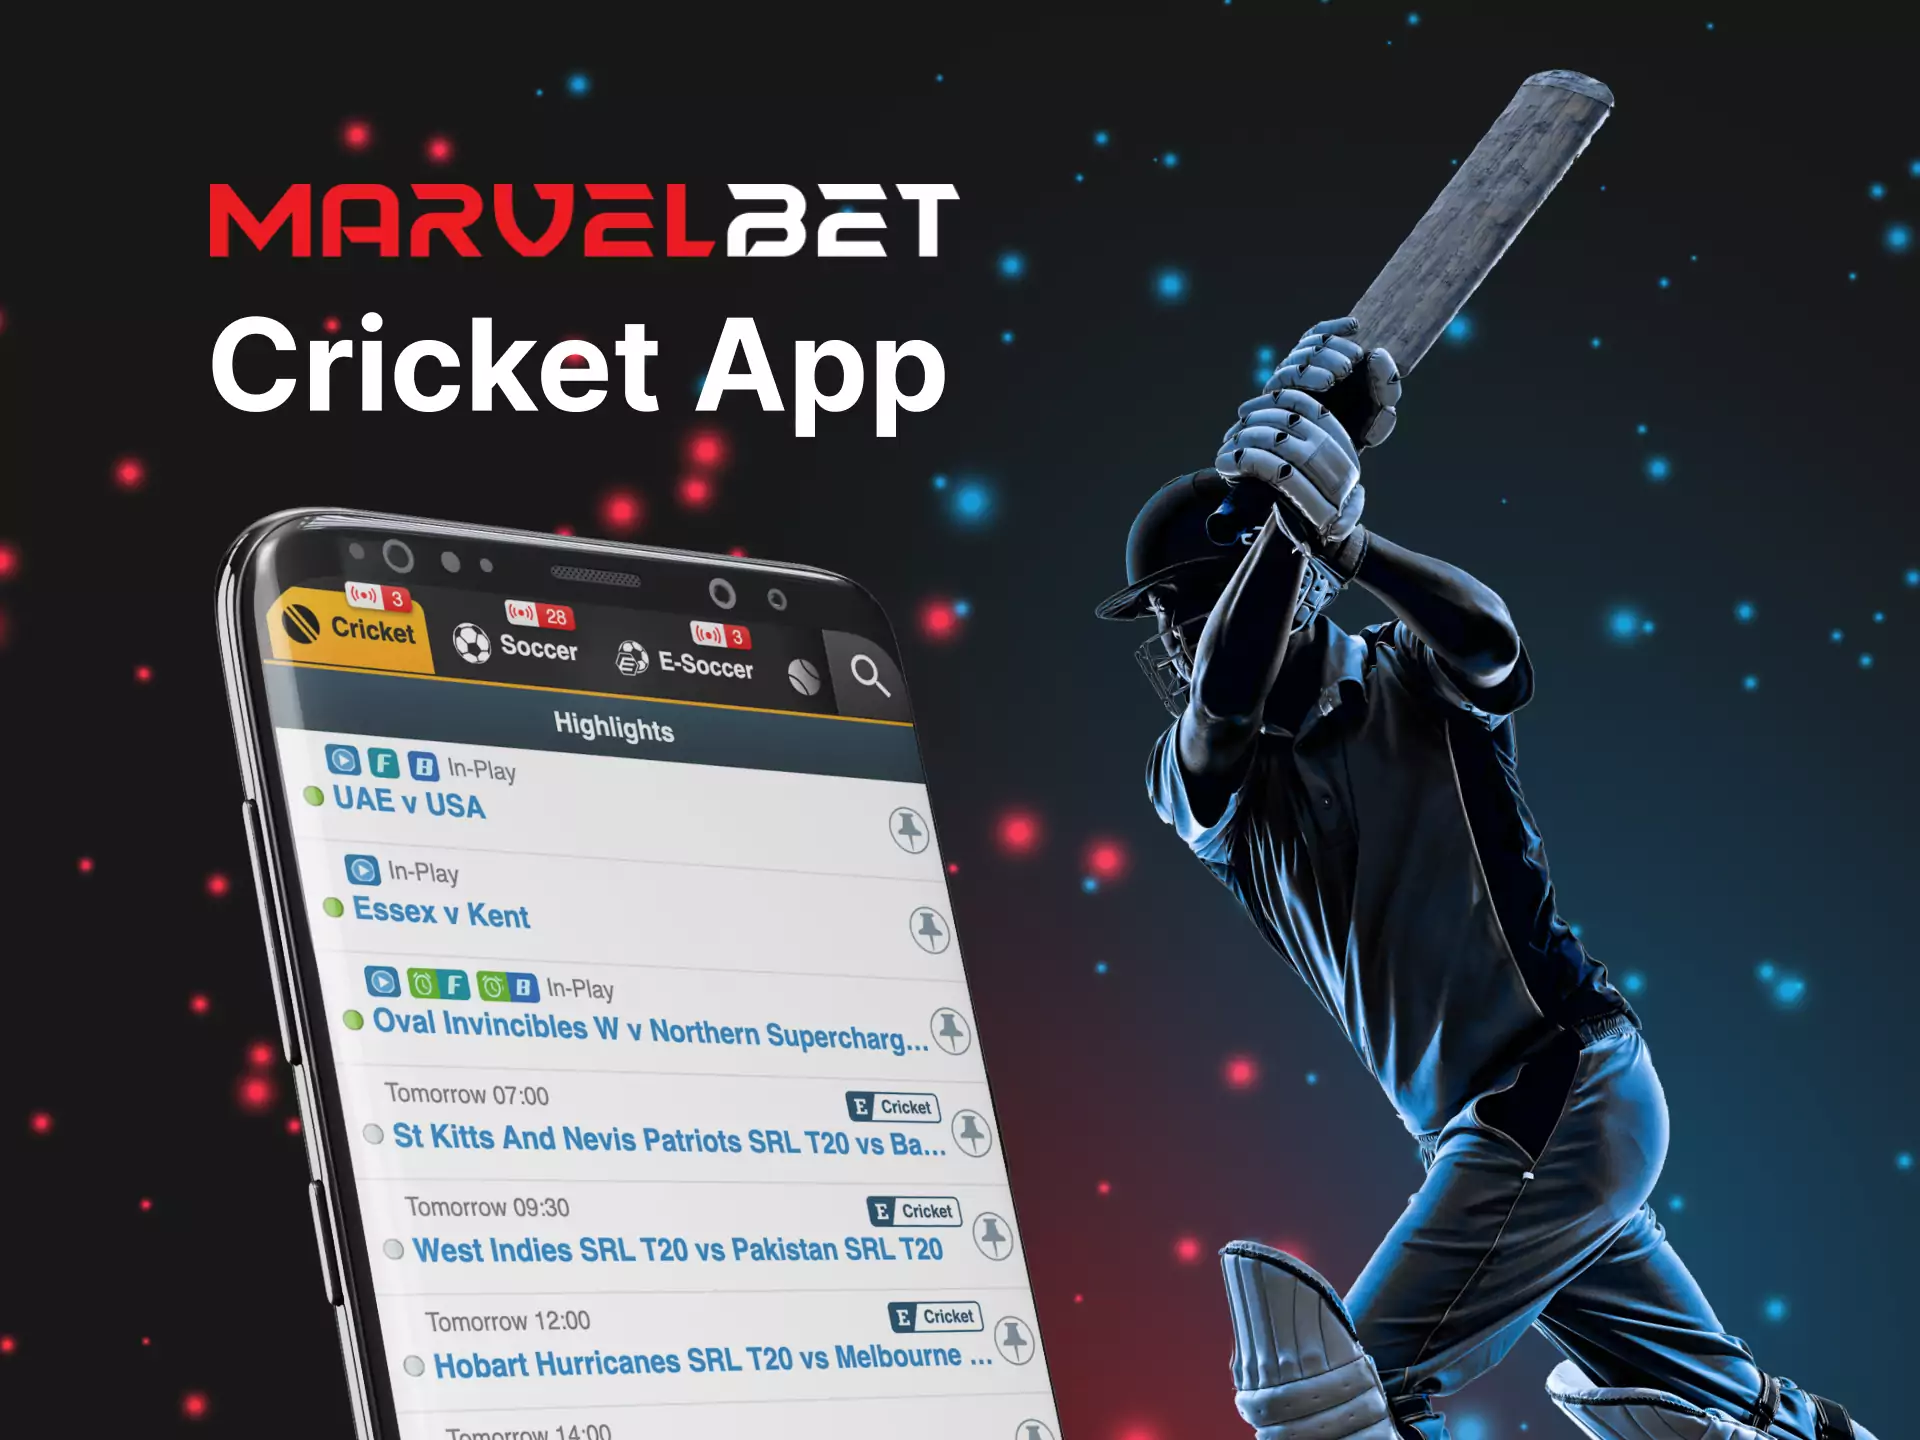 Since Marvelbet is an Indian-oriented bookmaker, cricket is the most popular sport for betting here.